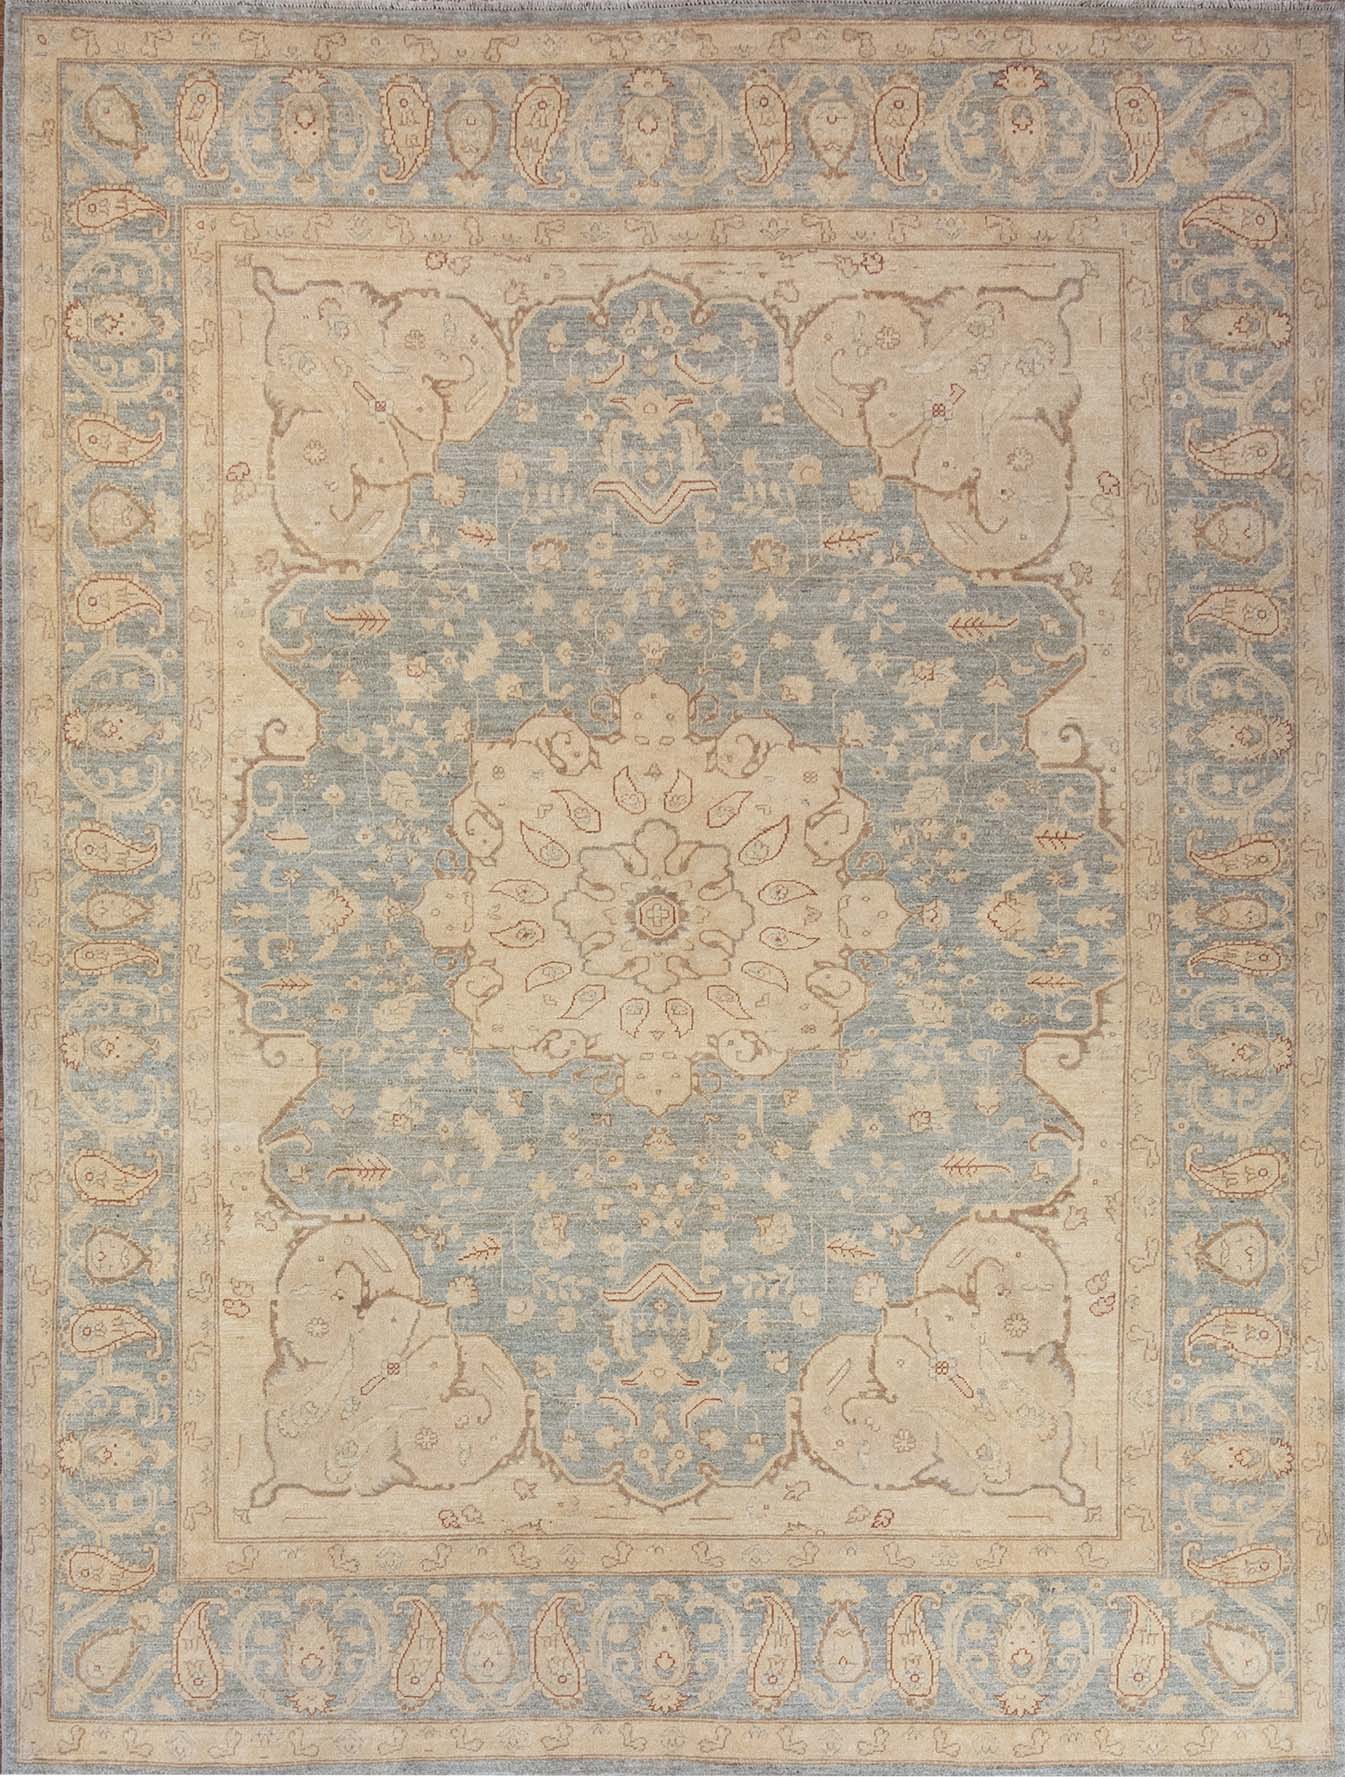 Turkish style rug, handmade Oushak style oriental rug in gray blue and pastel colors. Size 8.4x10.